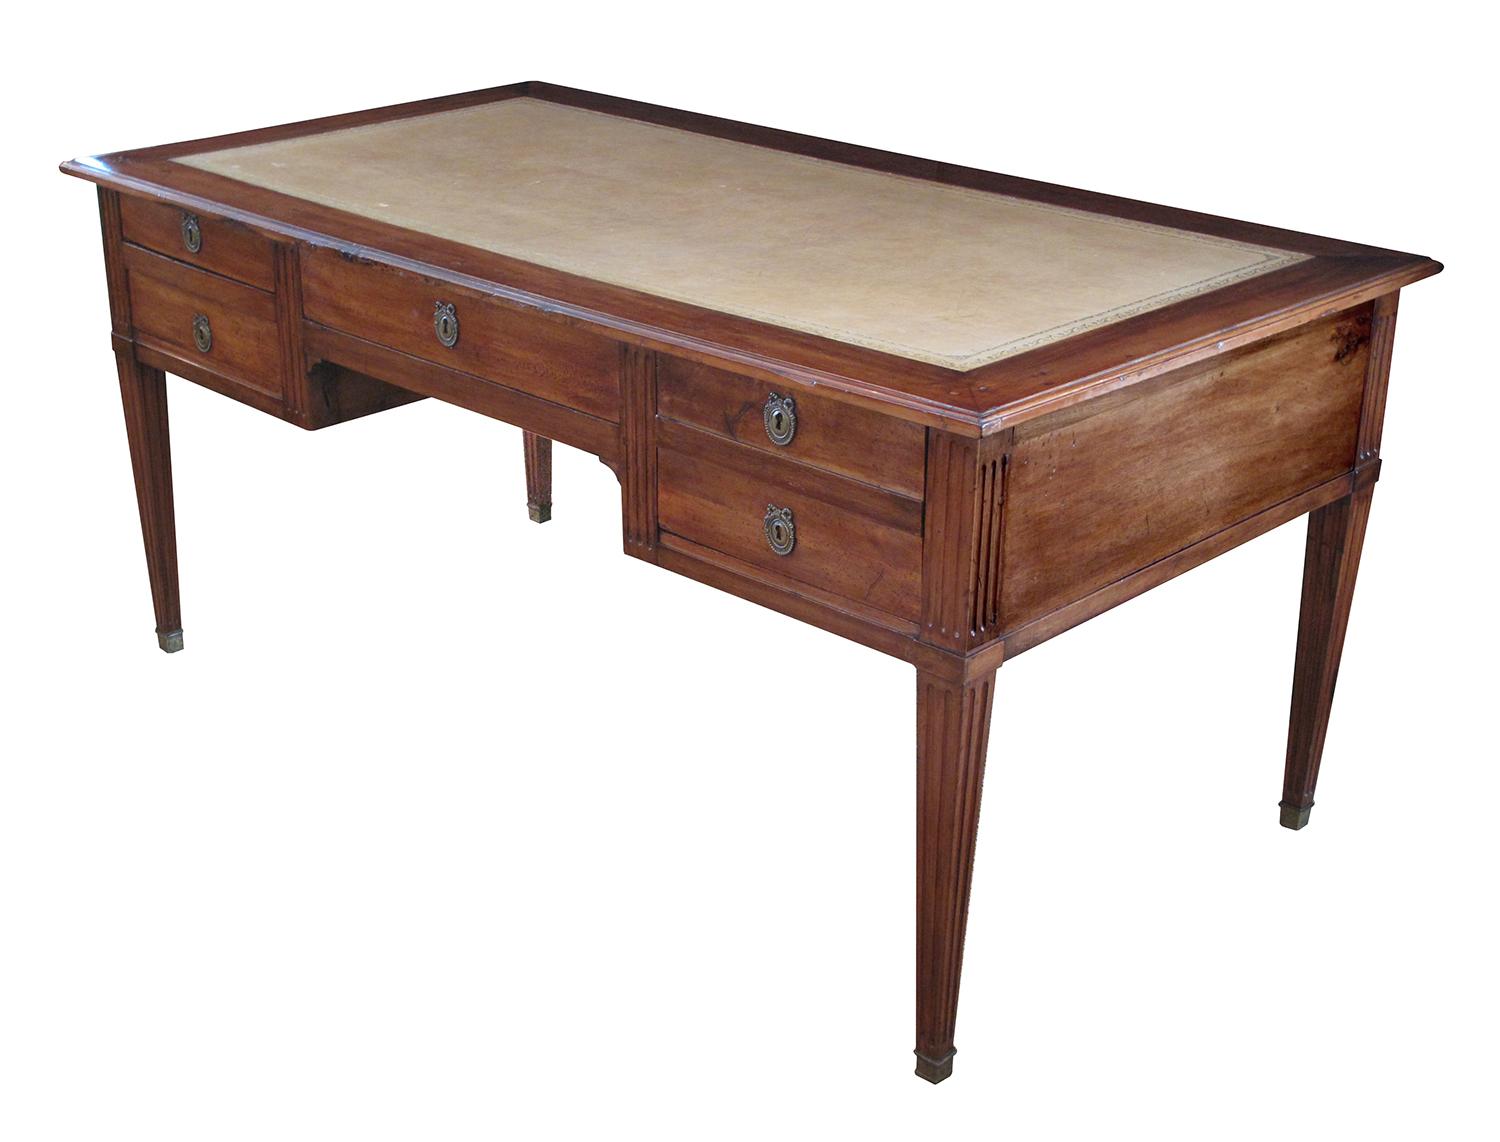 With hand-tooled pumice-colored leather top above 5-drawers all raised on tapering square-form fluted supports ending in brass caps; with finished paneled back.